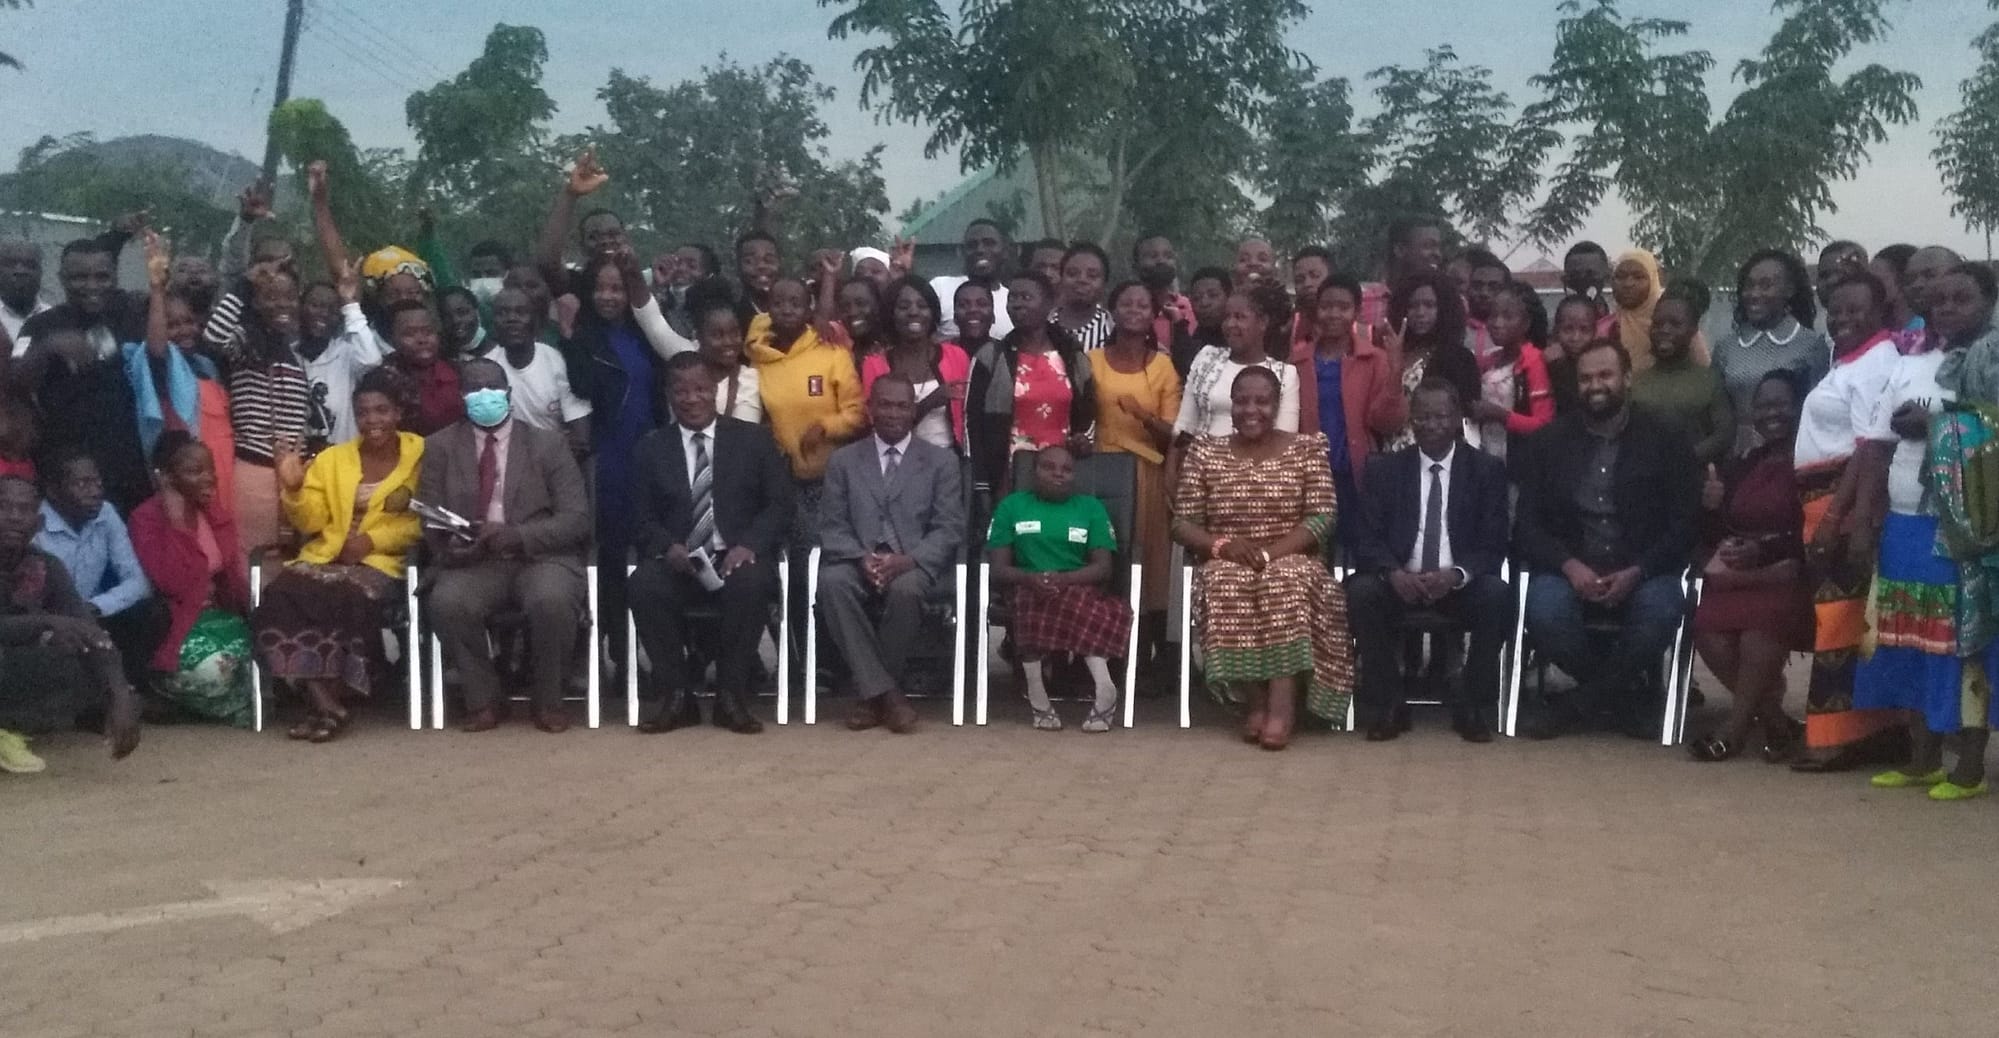 Young people in Malawi demand youth friendly services - Malawi 24